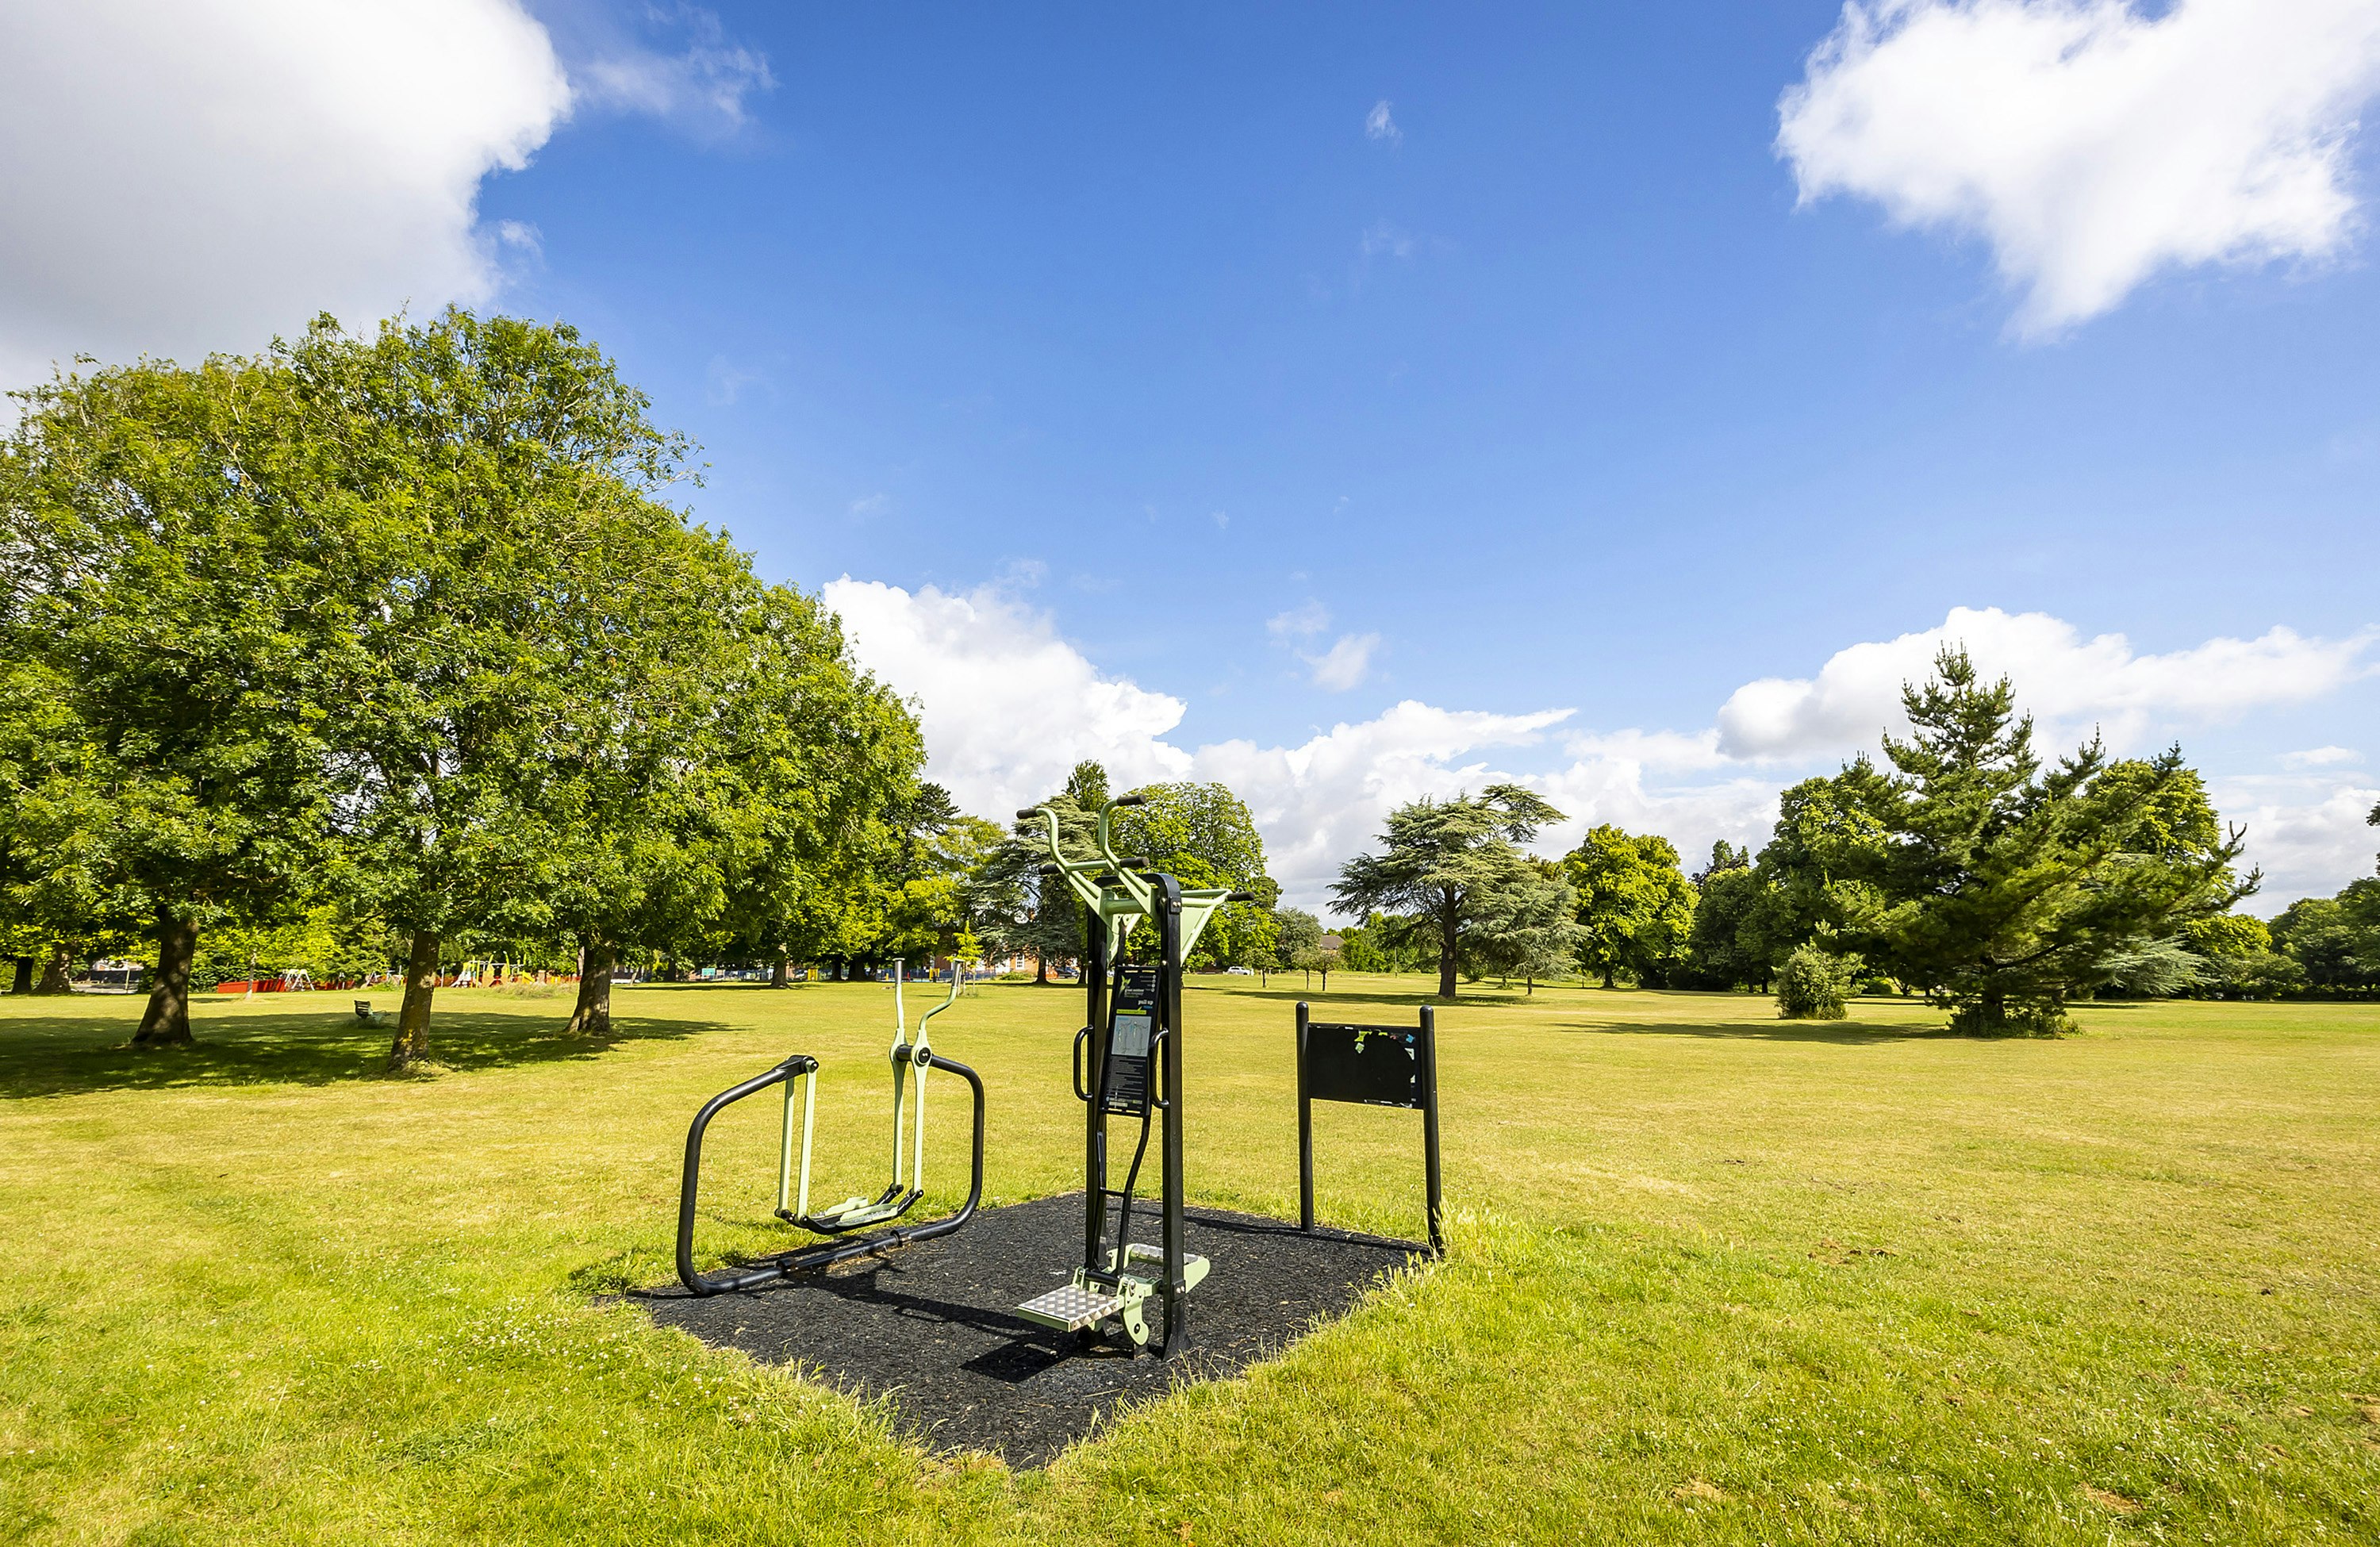 A green space within a park, gym equipment is central to the image. There are green trees in the background and bright blue sky.